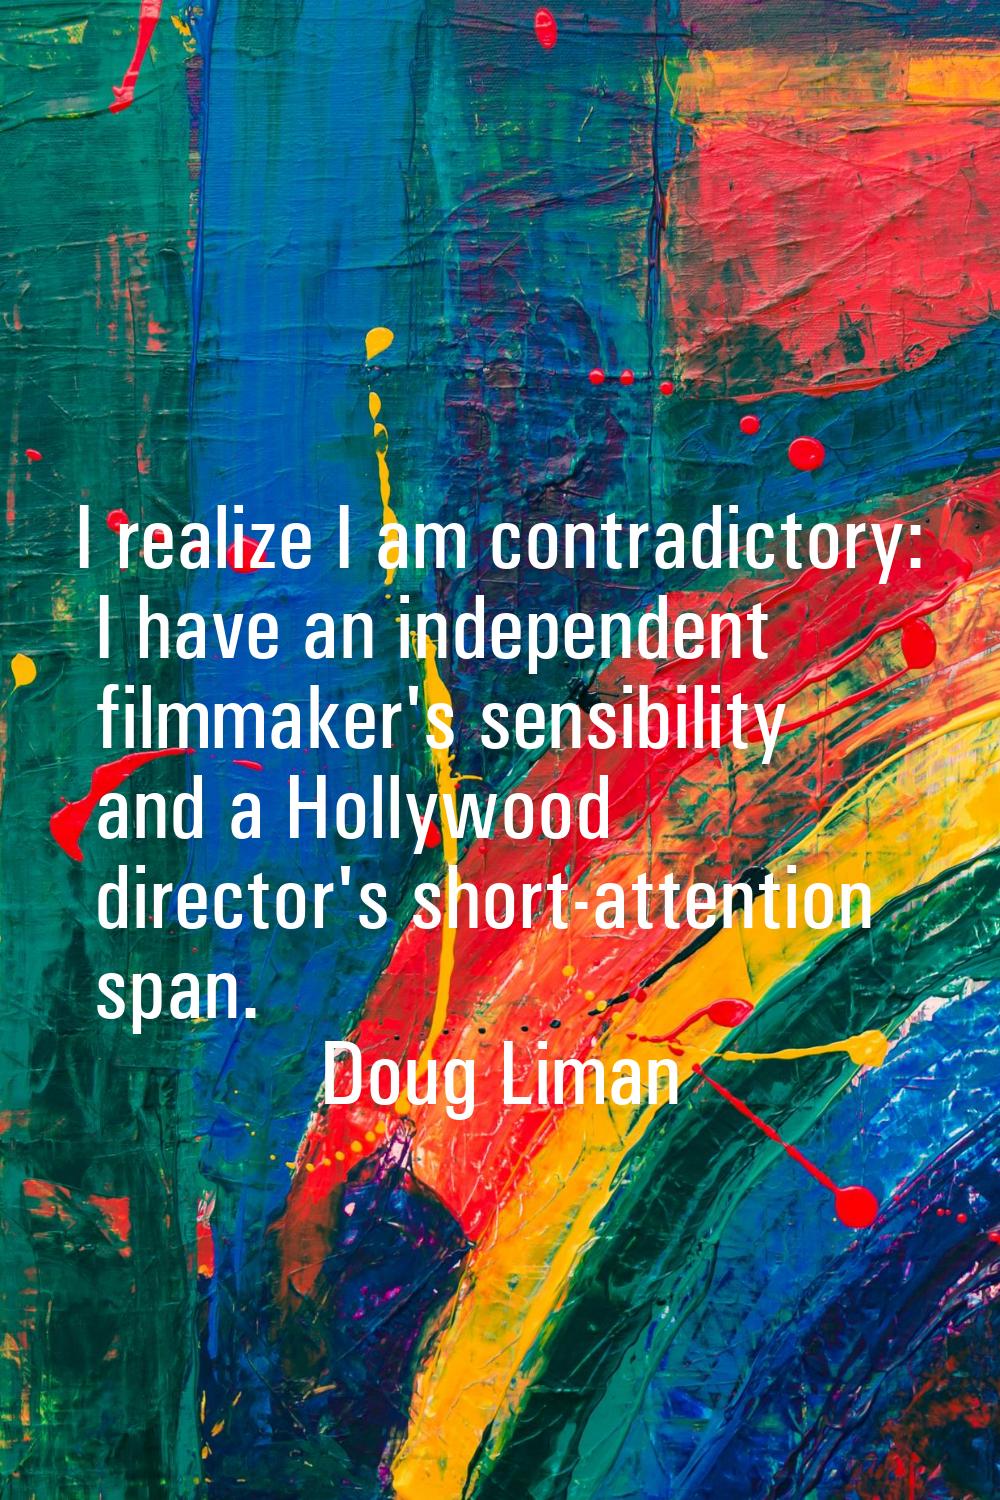 I realize I am contradictory: I have an independent filmmaker's sensibility and a Hollywood directo